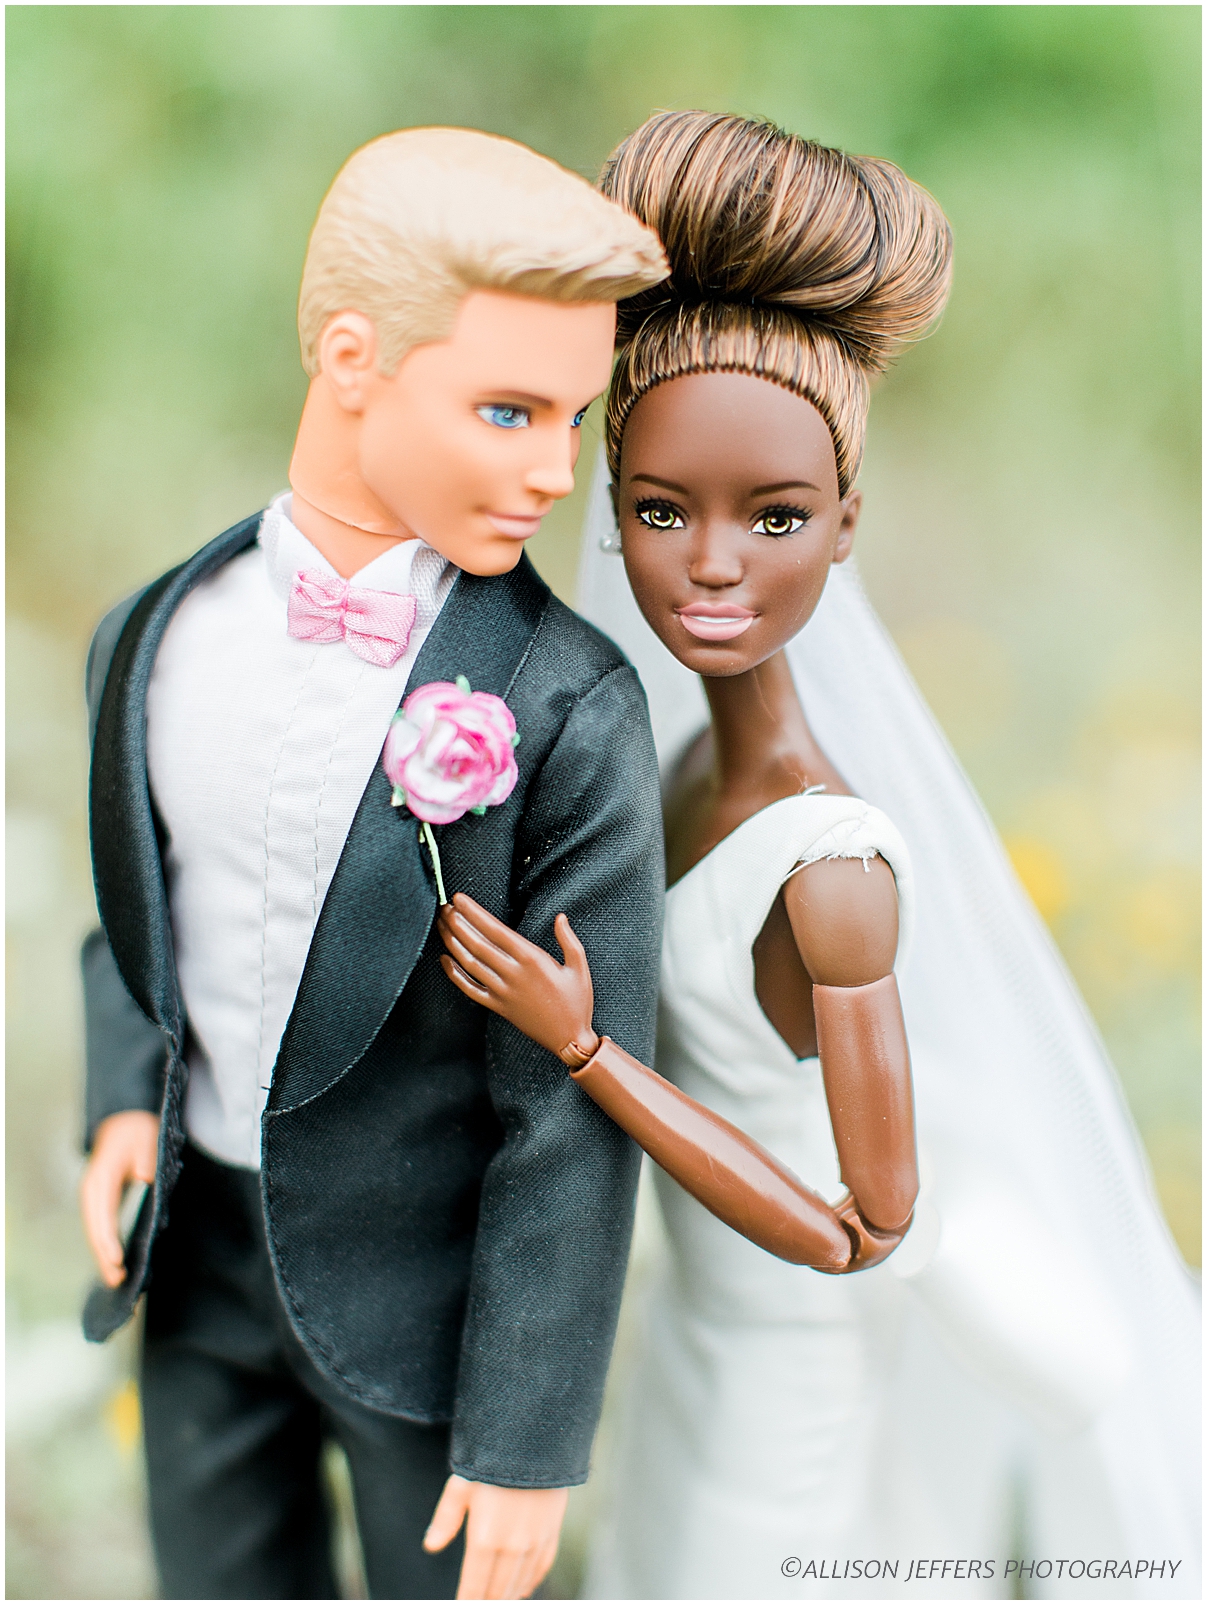 Barbie and Ken dream wedding photography styled shoot by Allison Jeffers Photography 0116